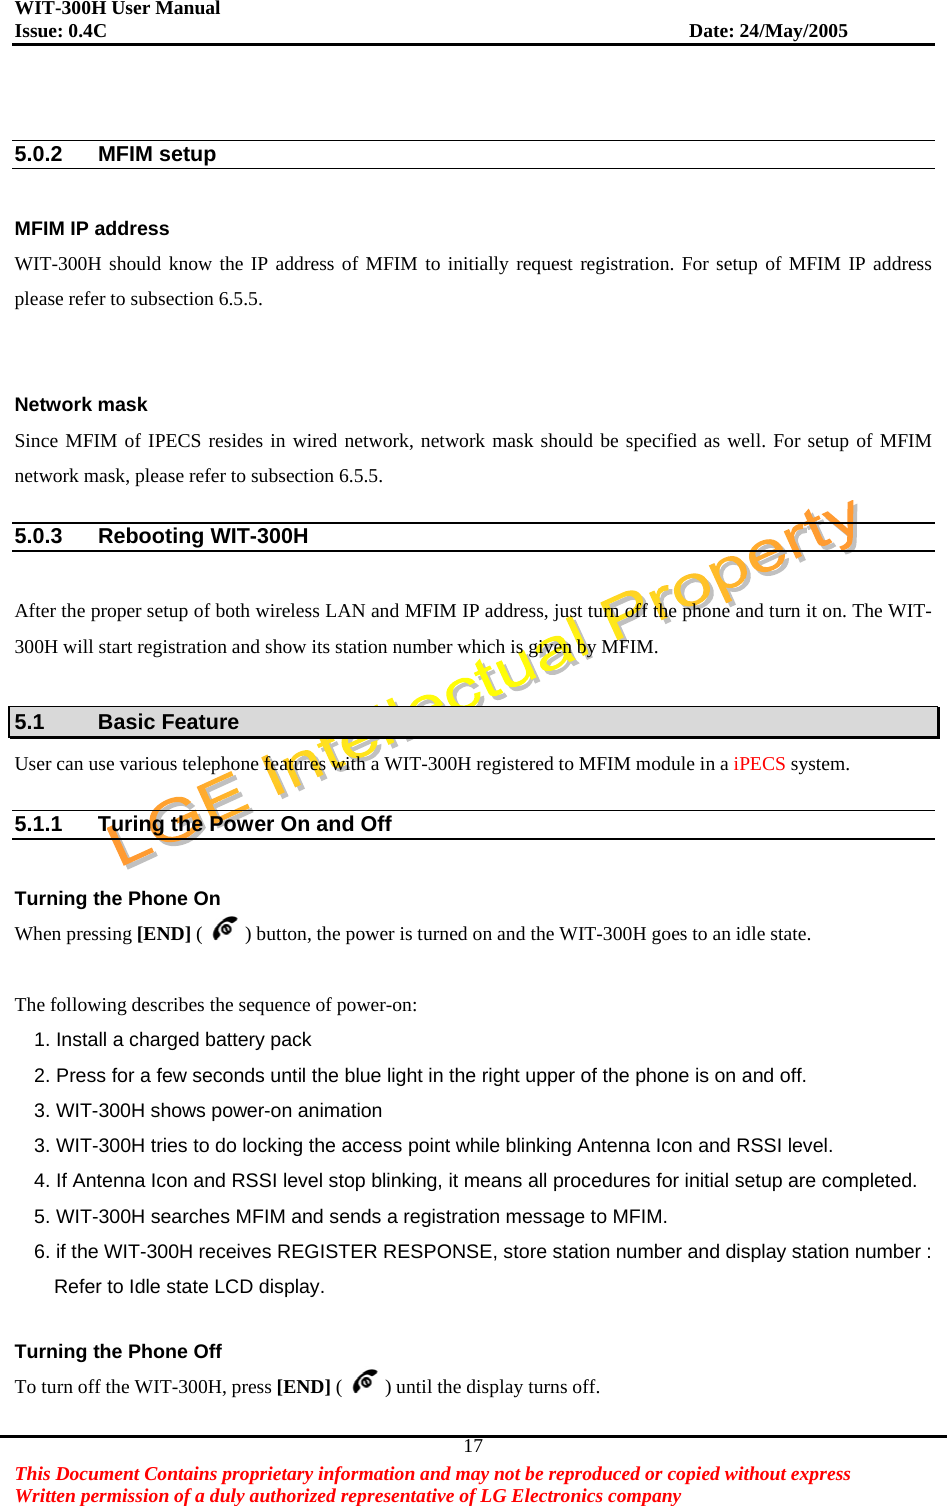 WIT-300H User Manual Issue: 0.4C                           Date: 24/May/2005   This Document Contains proprietary information and may not be reproduced or copied without express   Written permission of a duly authorized representative of LG Electronics company 17  5.0.2 MFIM setup  MFIM IP address   WIT-300H should know the IP address of MFIM to initially request registration. For setup of MFIM IP address please refer to subsection 6.5.5.   Network mask Since MFIM of IPECS resides in wired network, network mask should be specified as well. For setup of MFIM network mask, please refer to subsection 6.5.5.  5.0.3 Rebooting WIT-300H  After the proper setup of both wireless LAN and MFIM IP address, just turn off the phone and turn it on. The WIT-300H will start registration and show its station number which is given by MFIM.    5.1 Basic Feature User can use various telephone features with a WIT-300H registered to MFIM module in a iPECS system.  5.1.1  Turing the Power On and Off  Turning the Phone On When pressing [END] ( ) button, the power is turned on and the WIT-300H goes to an idle state.  The following describes the sequence of power-on: 1. Install a charged battery pack   2. Press for a few seconds until the blue light in the right upper of the phone is on and off. 3. WIT-300H shows power-on animation 3. WIT-300H tries to do locking the access point while blinking Antenna Icon and RSSI level. 4. If Antenna Icon and RSSI level stop blinking, it means all procedures for initial setup are completed. 5. WIT-300H searches MFIM and sends a registration message to MFIM. 6. if the WIT-300H receives REGISTER RESPONSE, store station number and display station number :       Refer to Idle state LCD display.  Turning the Phone Off To turn off the WIT-300H, press [END] ( ) until the display turns off.    